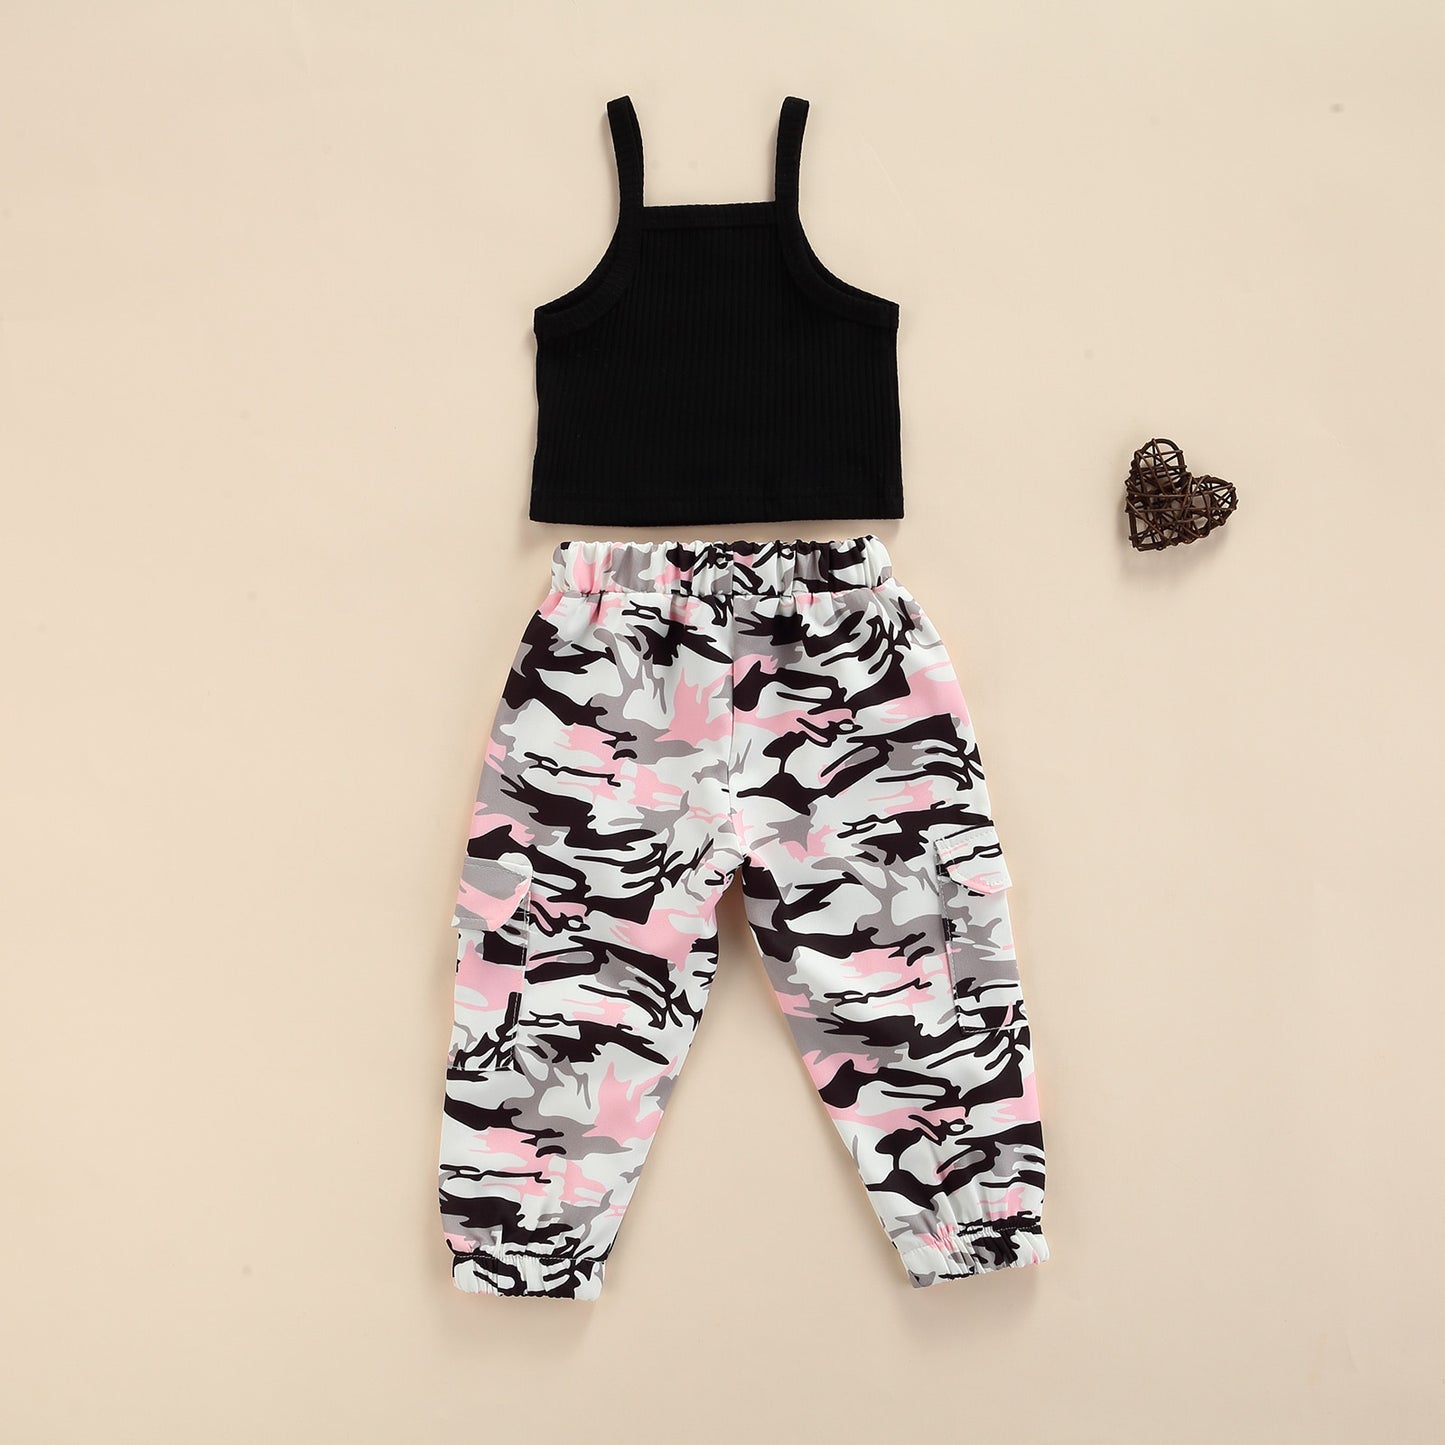 FOCUSNORM 1-7Y Summer Fashion Girls Clothes Sets 2pcs Sleeveless Solid Vest Tops Camouflage Printed Long Pants